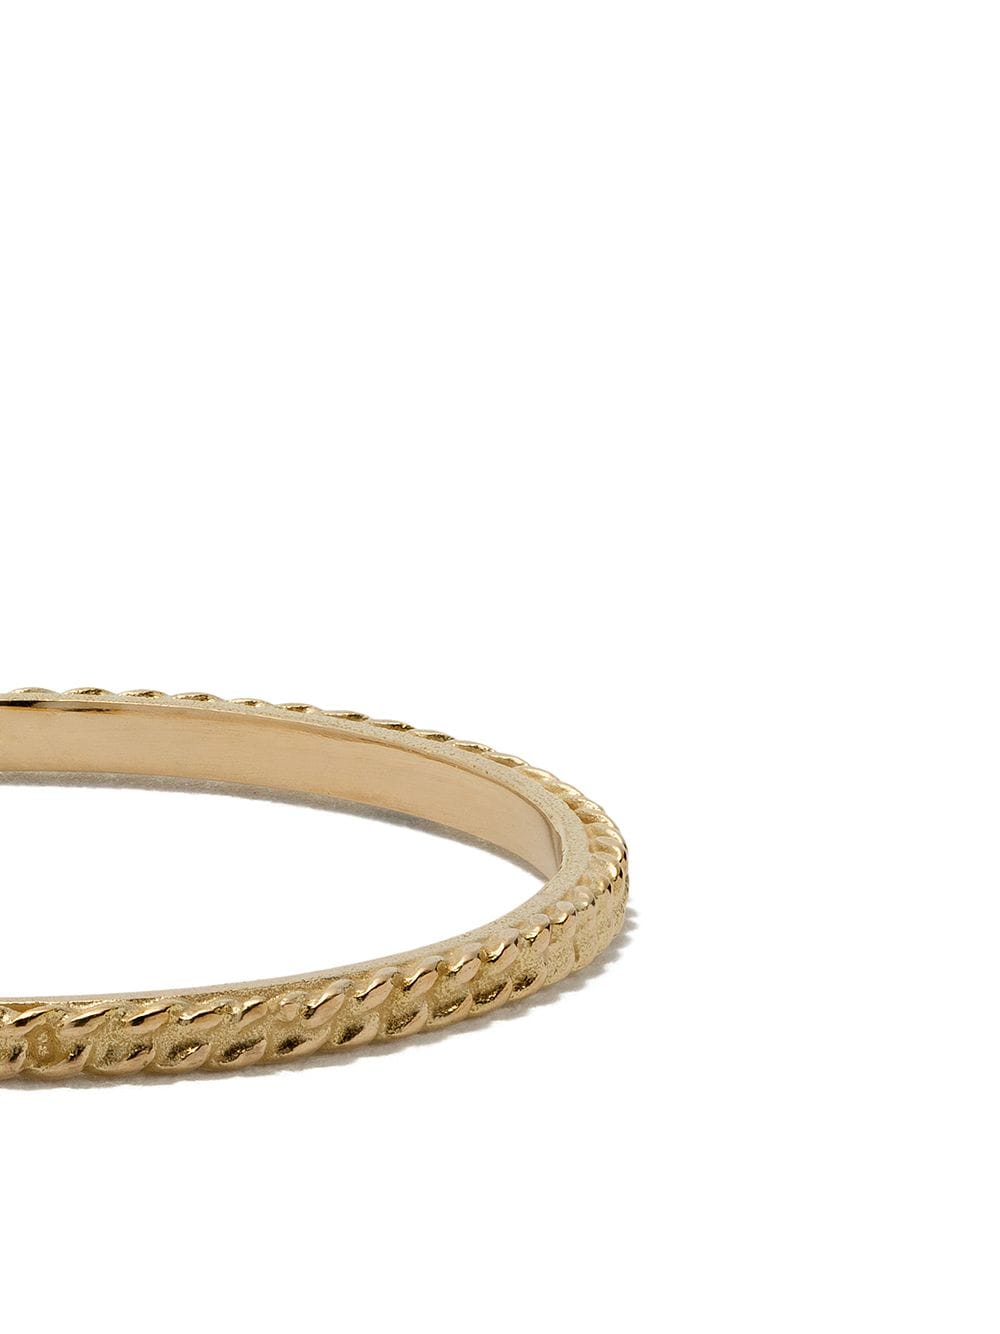 WOUTERS & HENDRIX GOLD GOURMET CHAIN 18K金戒指 - YELLOW GOLD